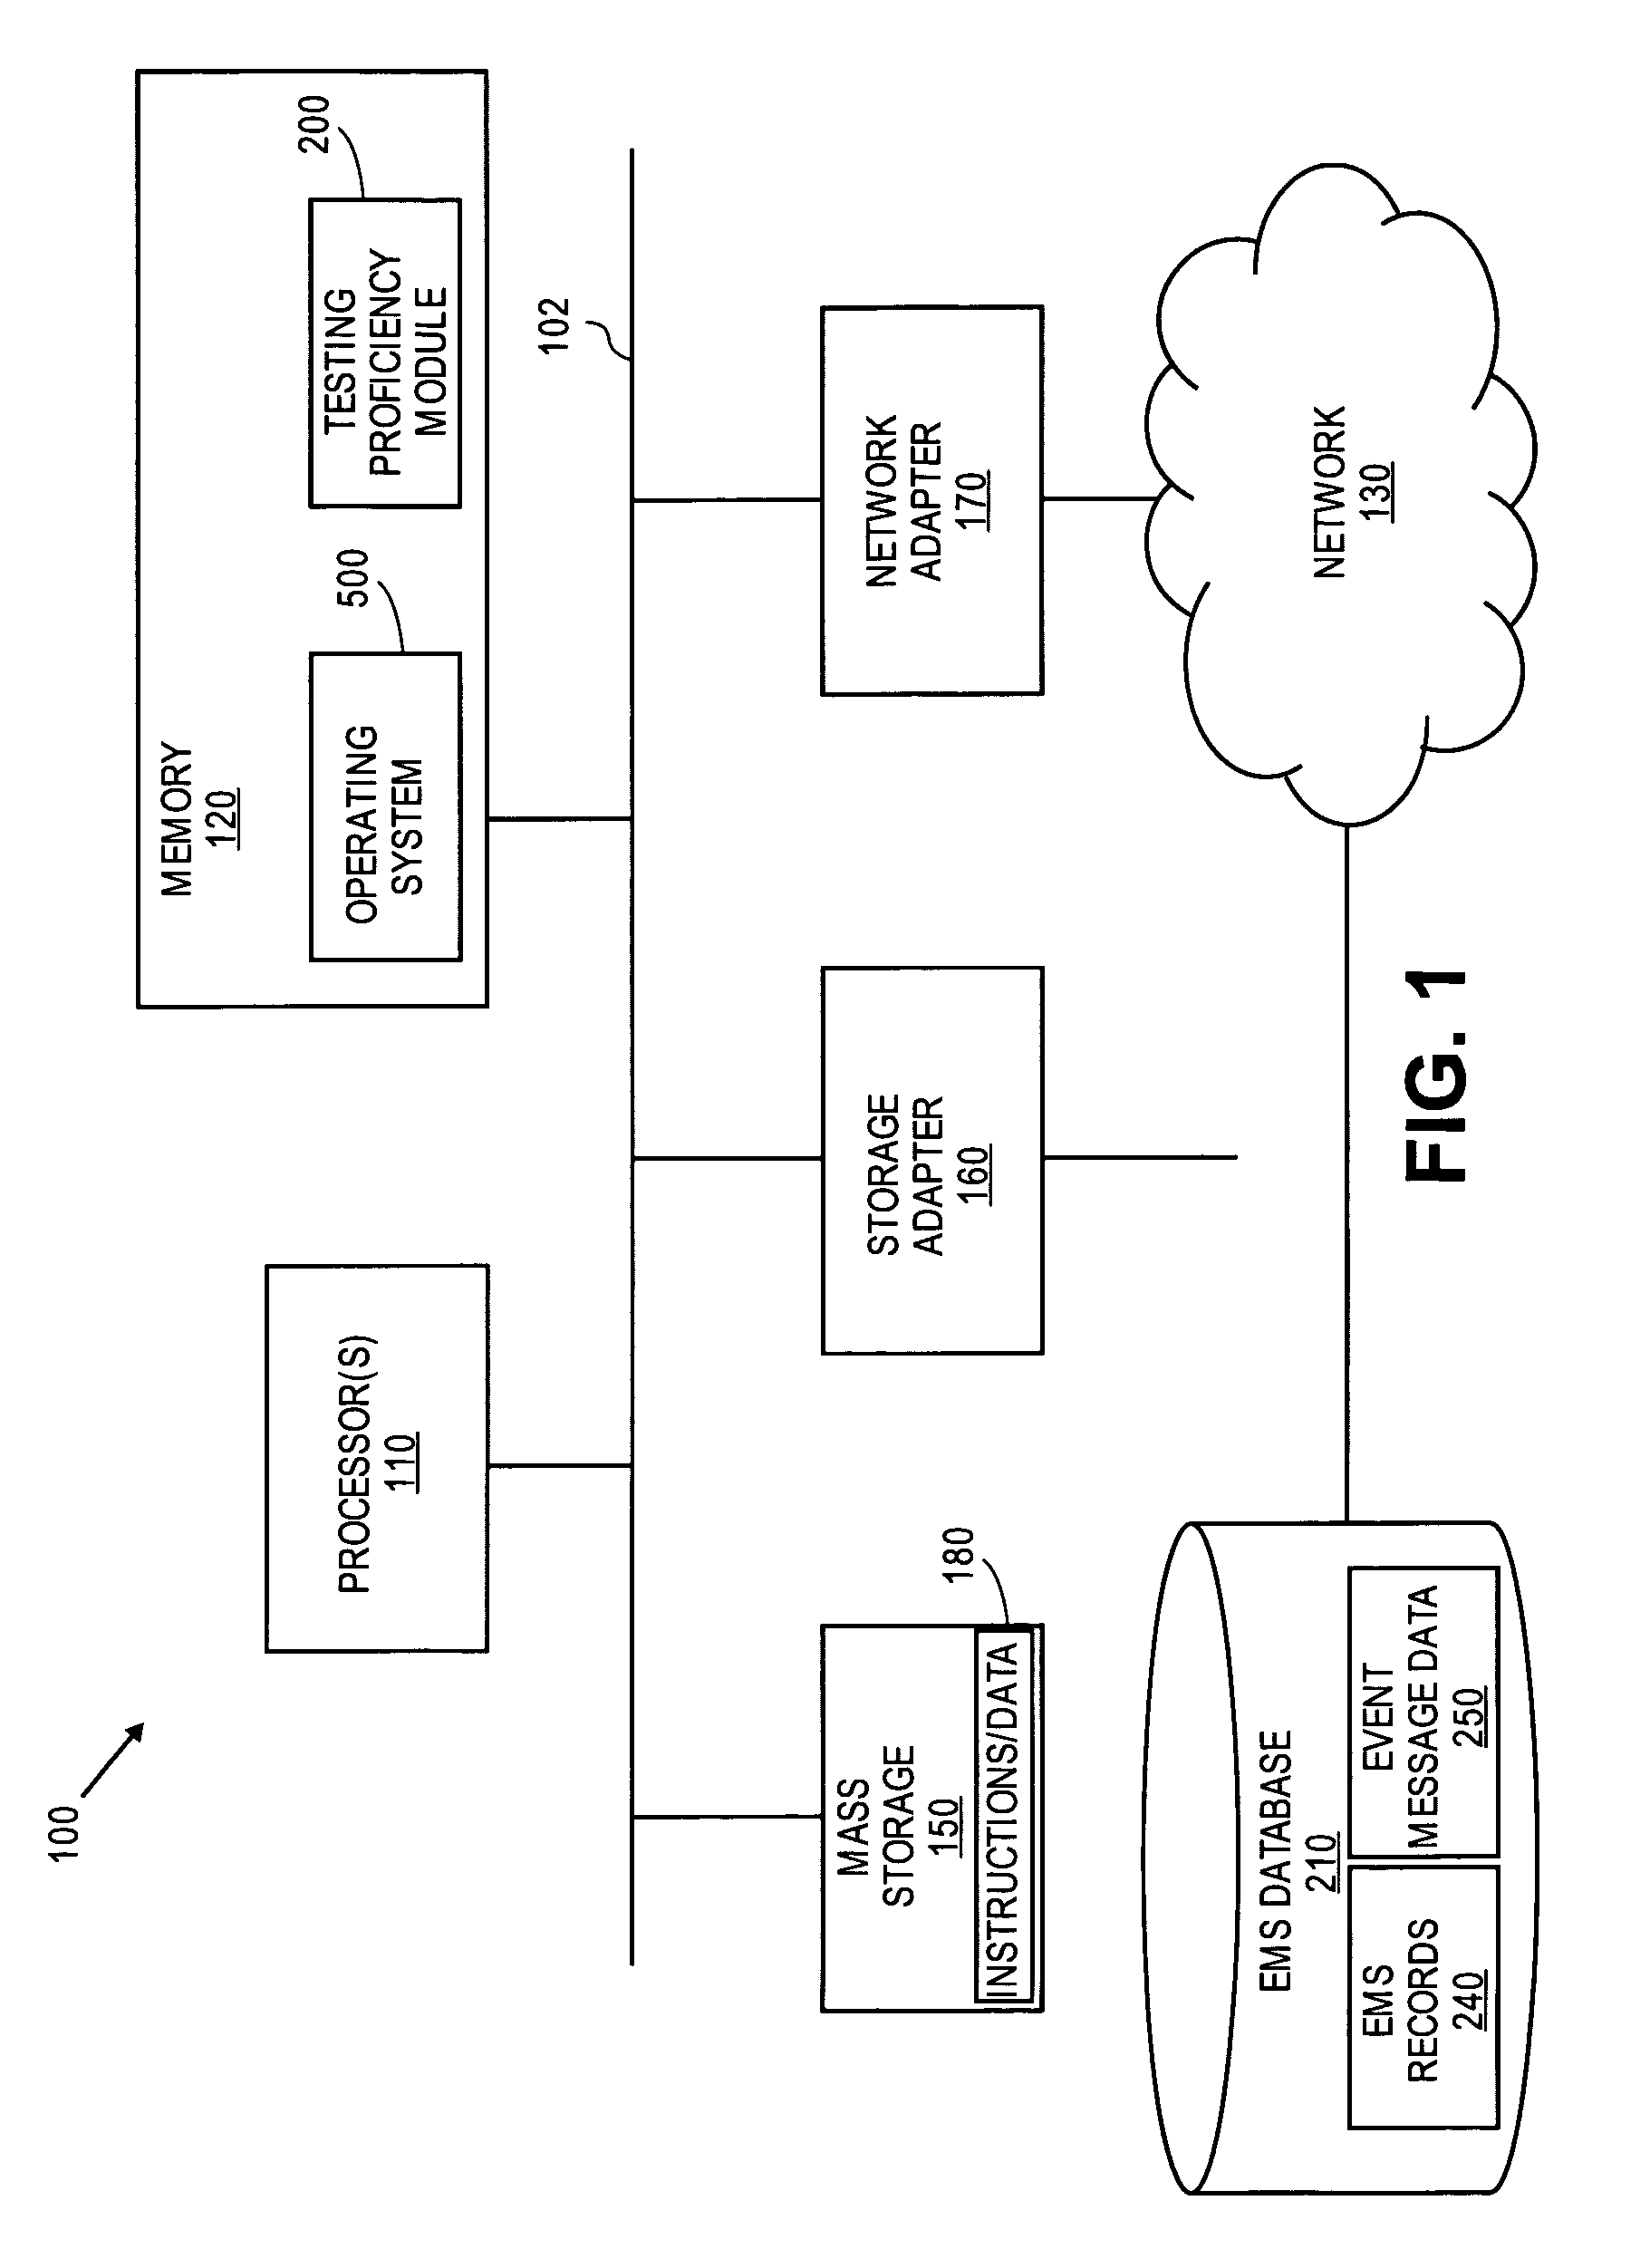 Apparatus and method for estimating the testing proficiency of a software test according to EMS messages extracted from a code base